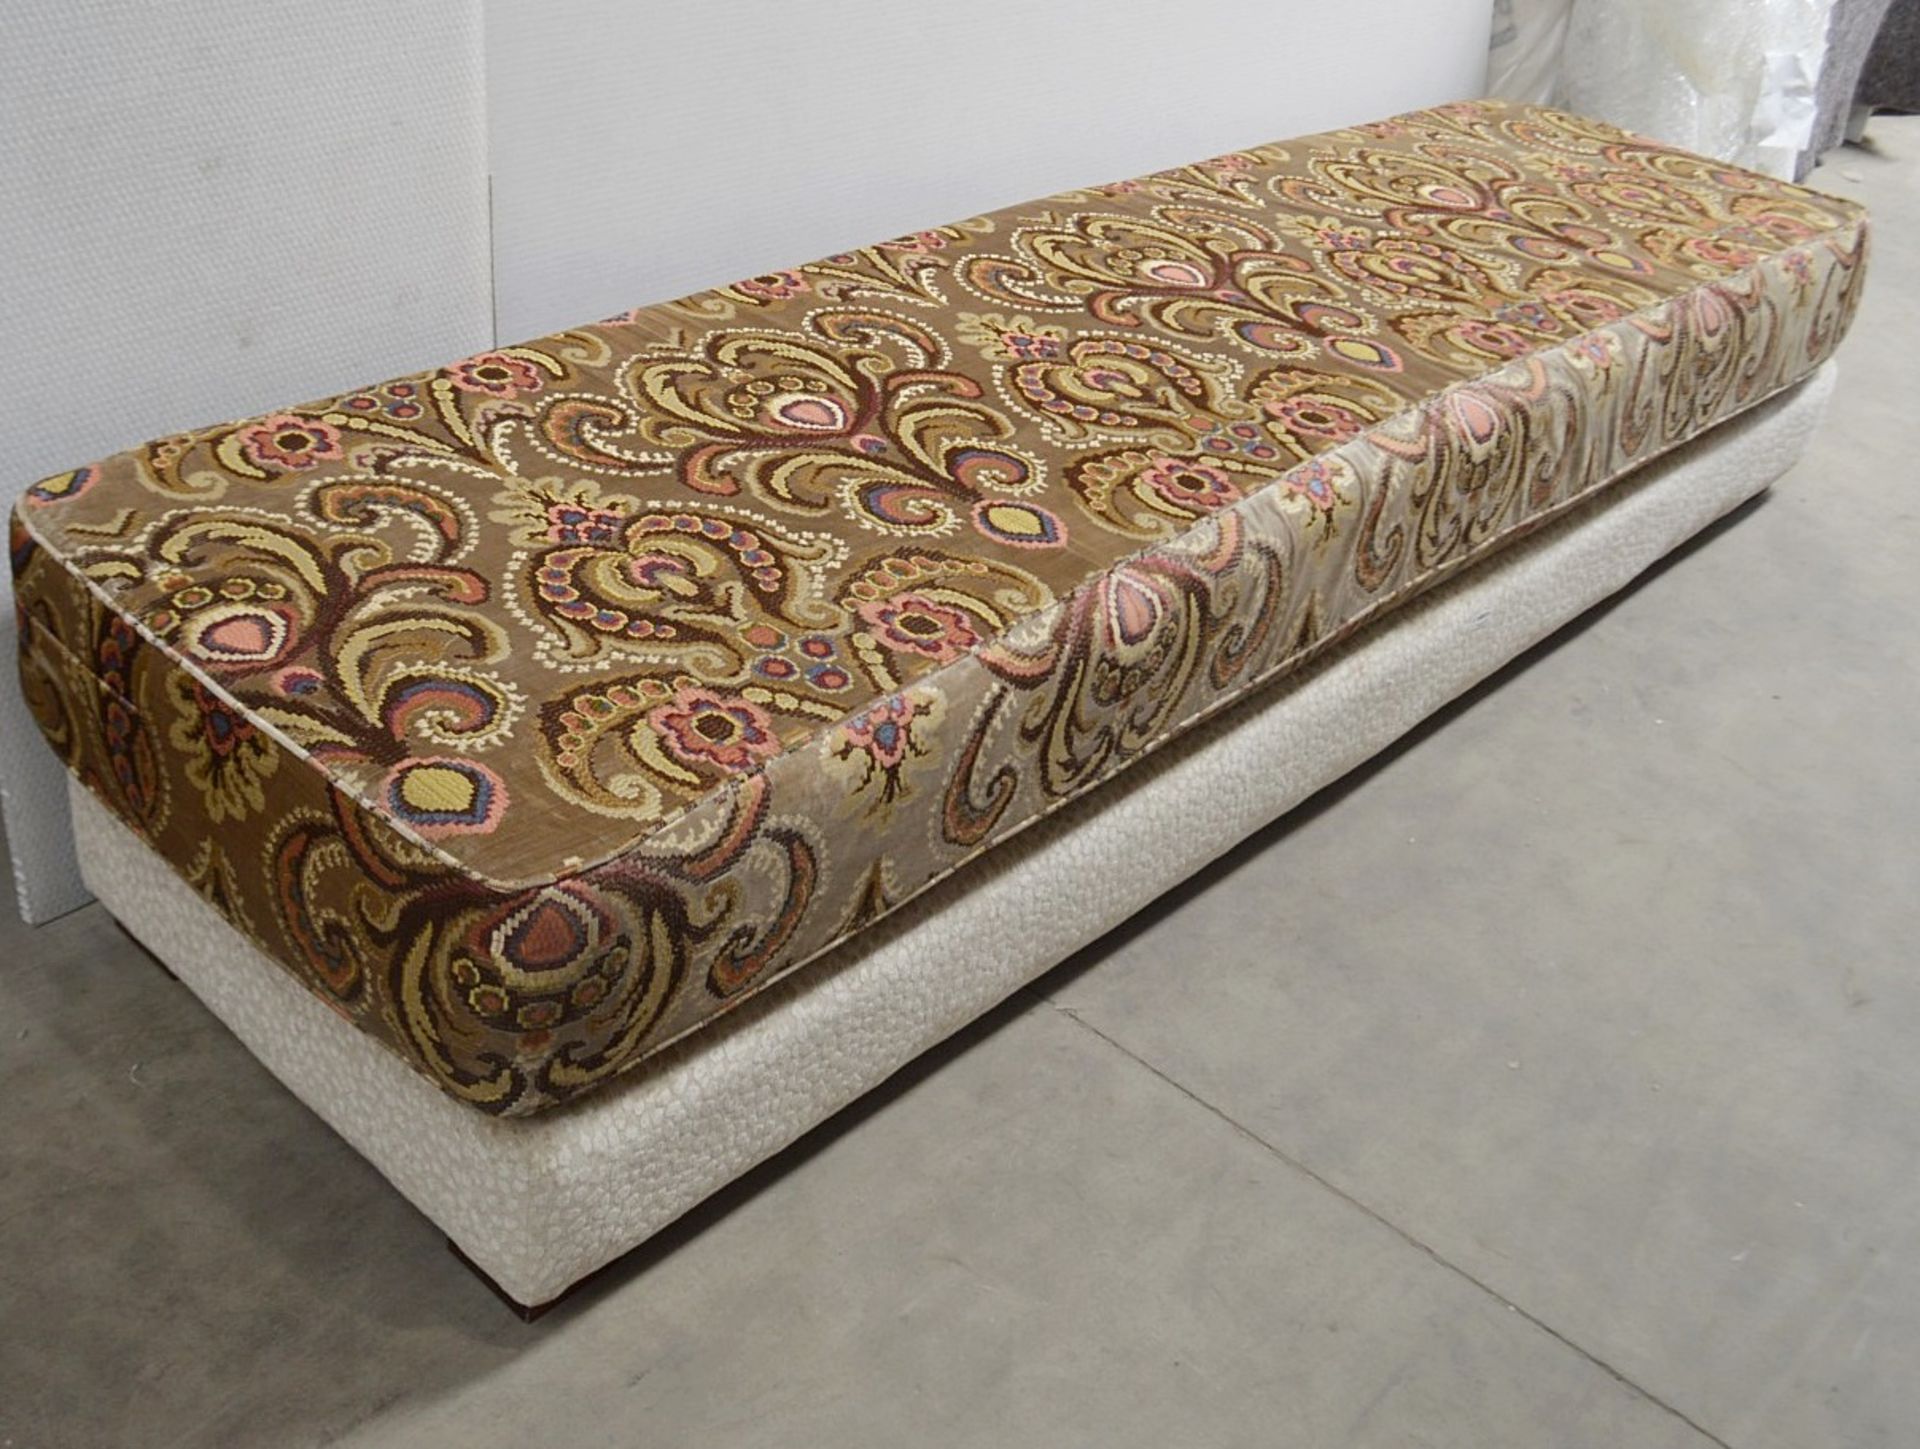 1 x Impressive 9ft Long Moroccan-style Seating Bench With Matching Footstool And 6 x Scatter - Image 6 of 9